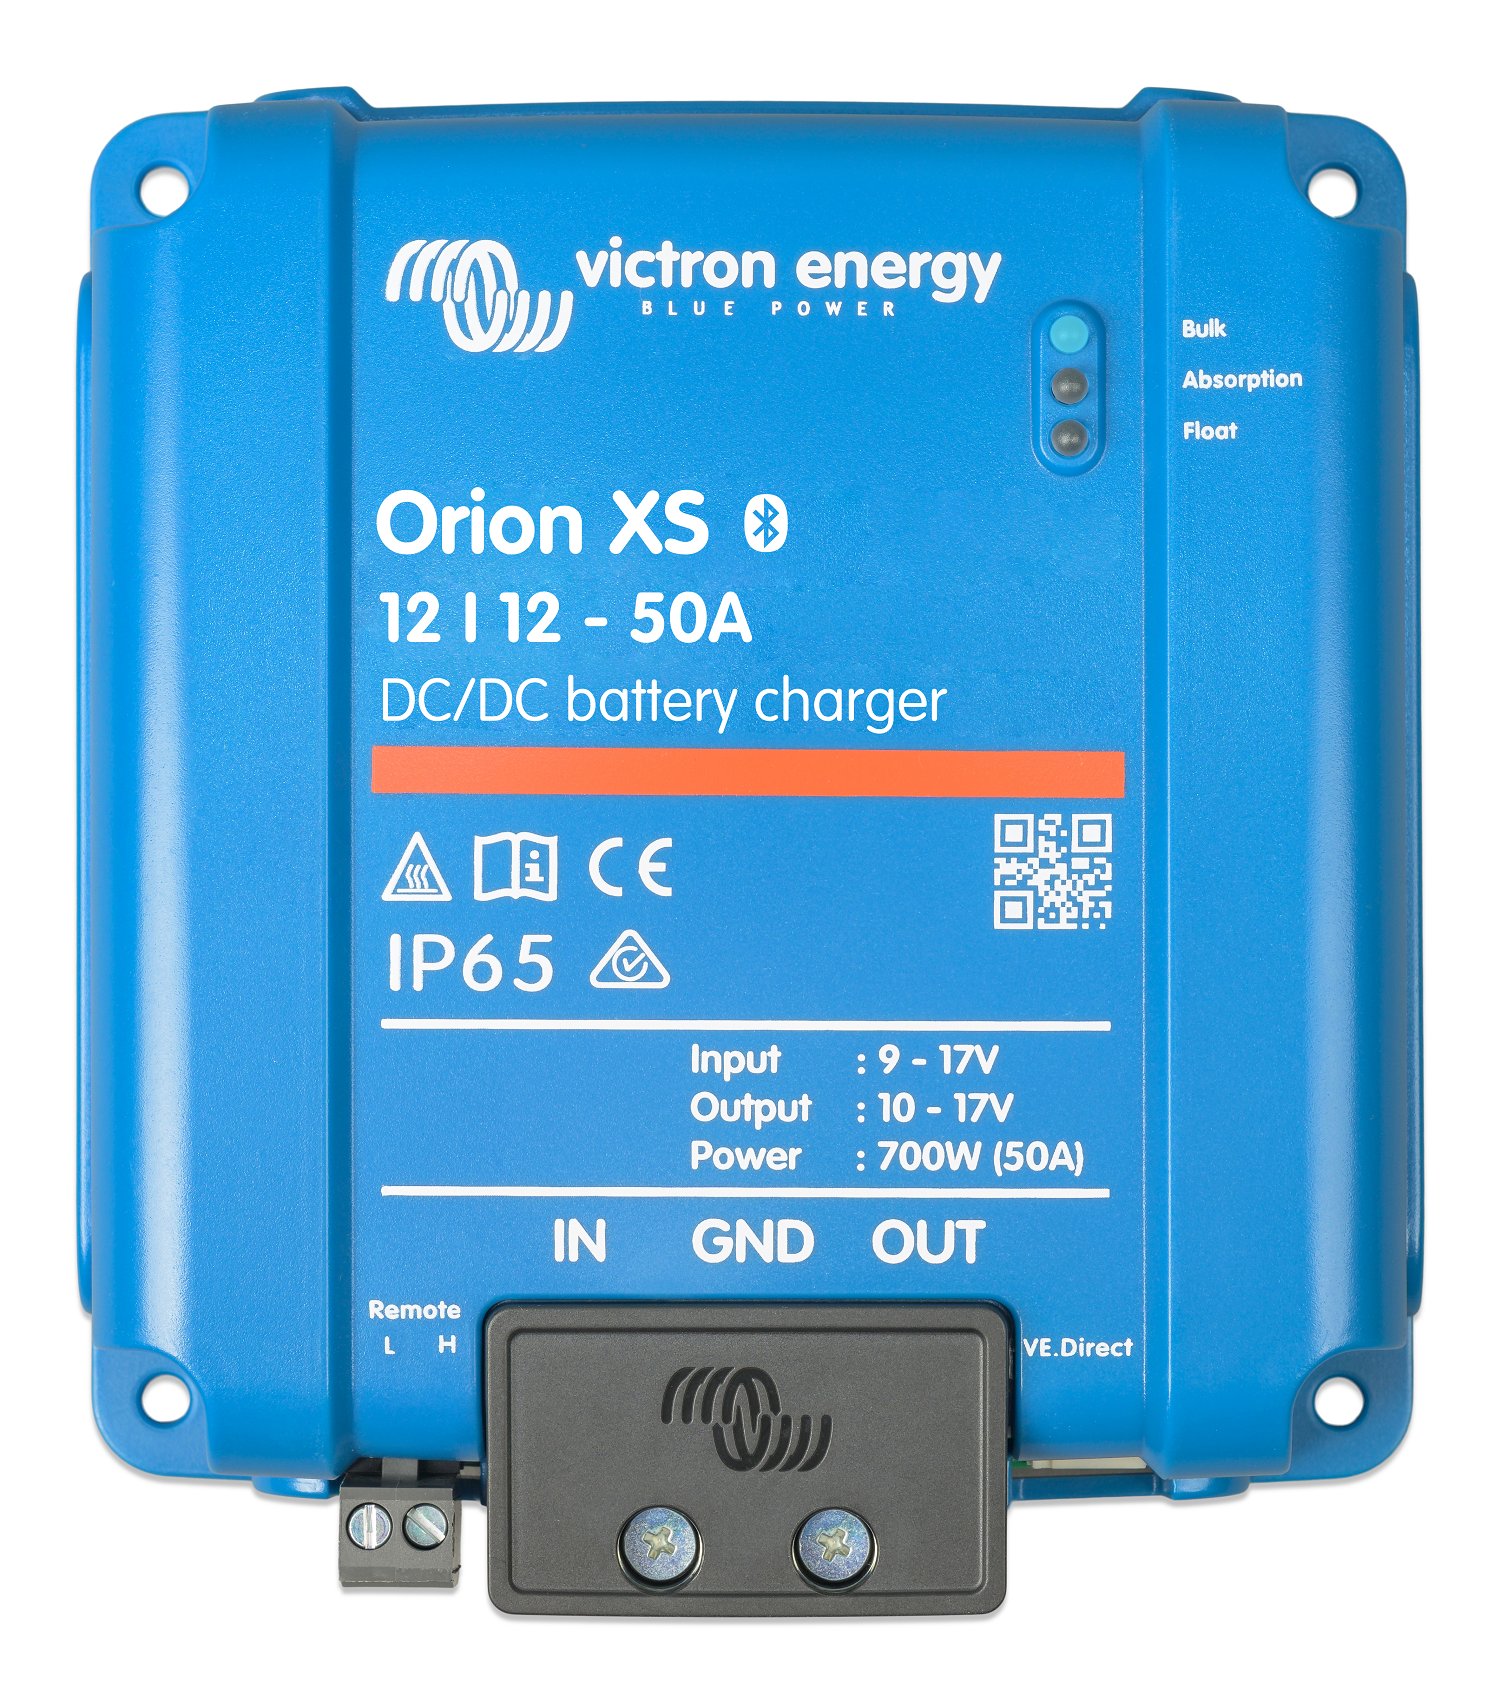 Can the input/output current be configured on the Orion XS?